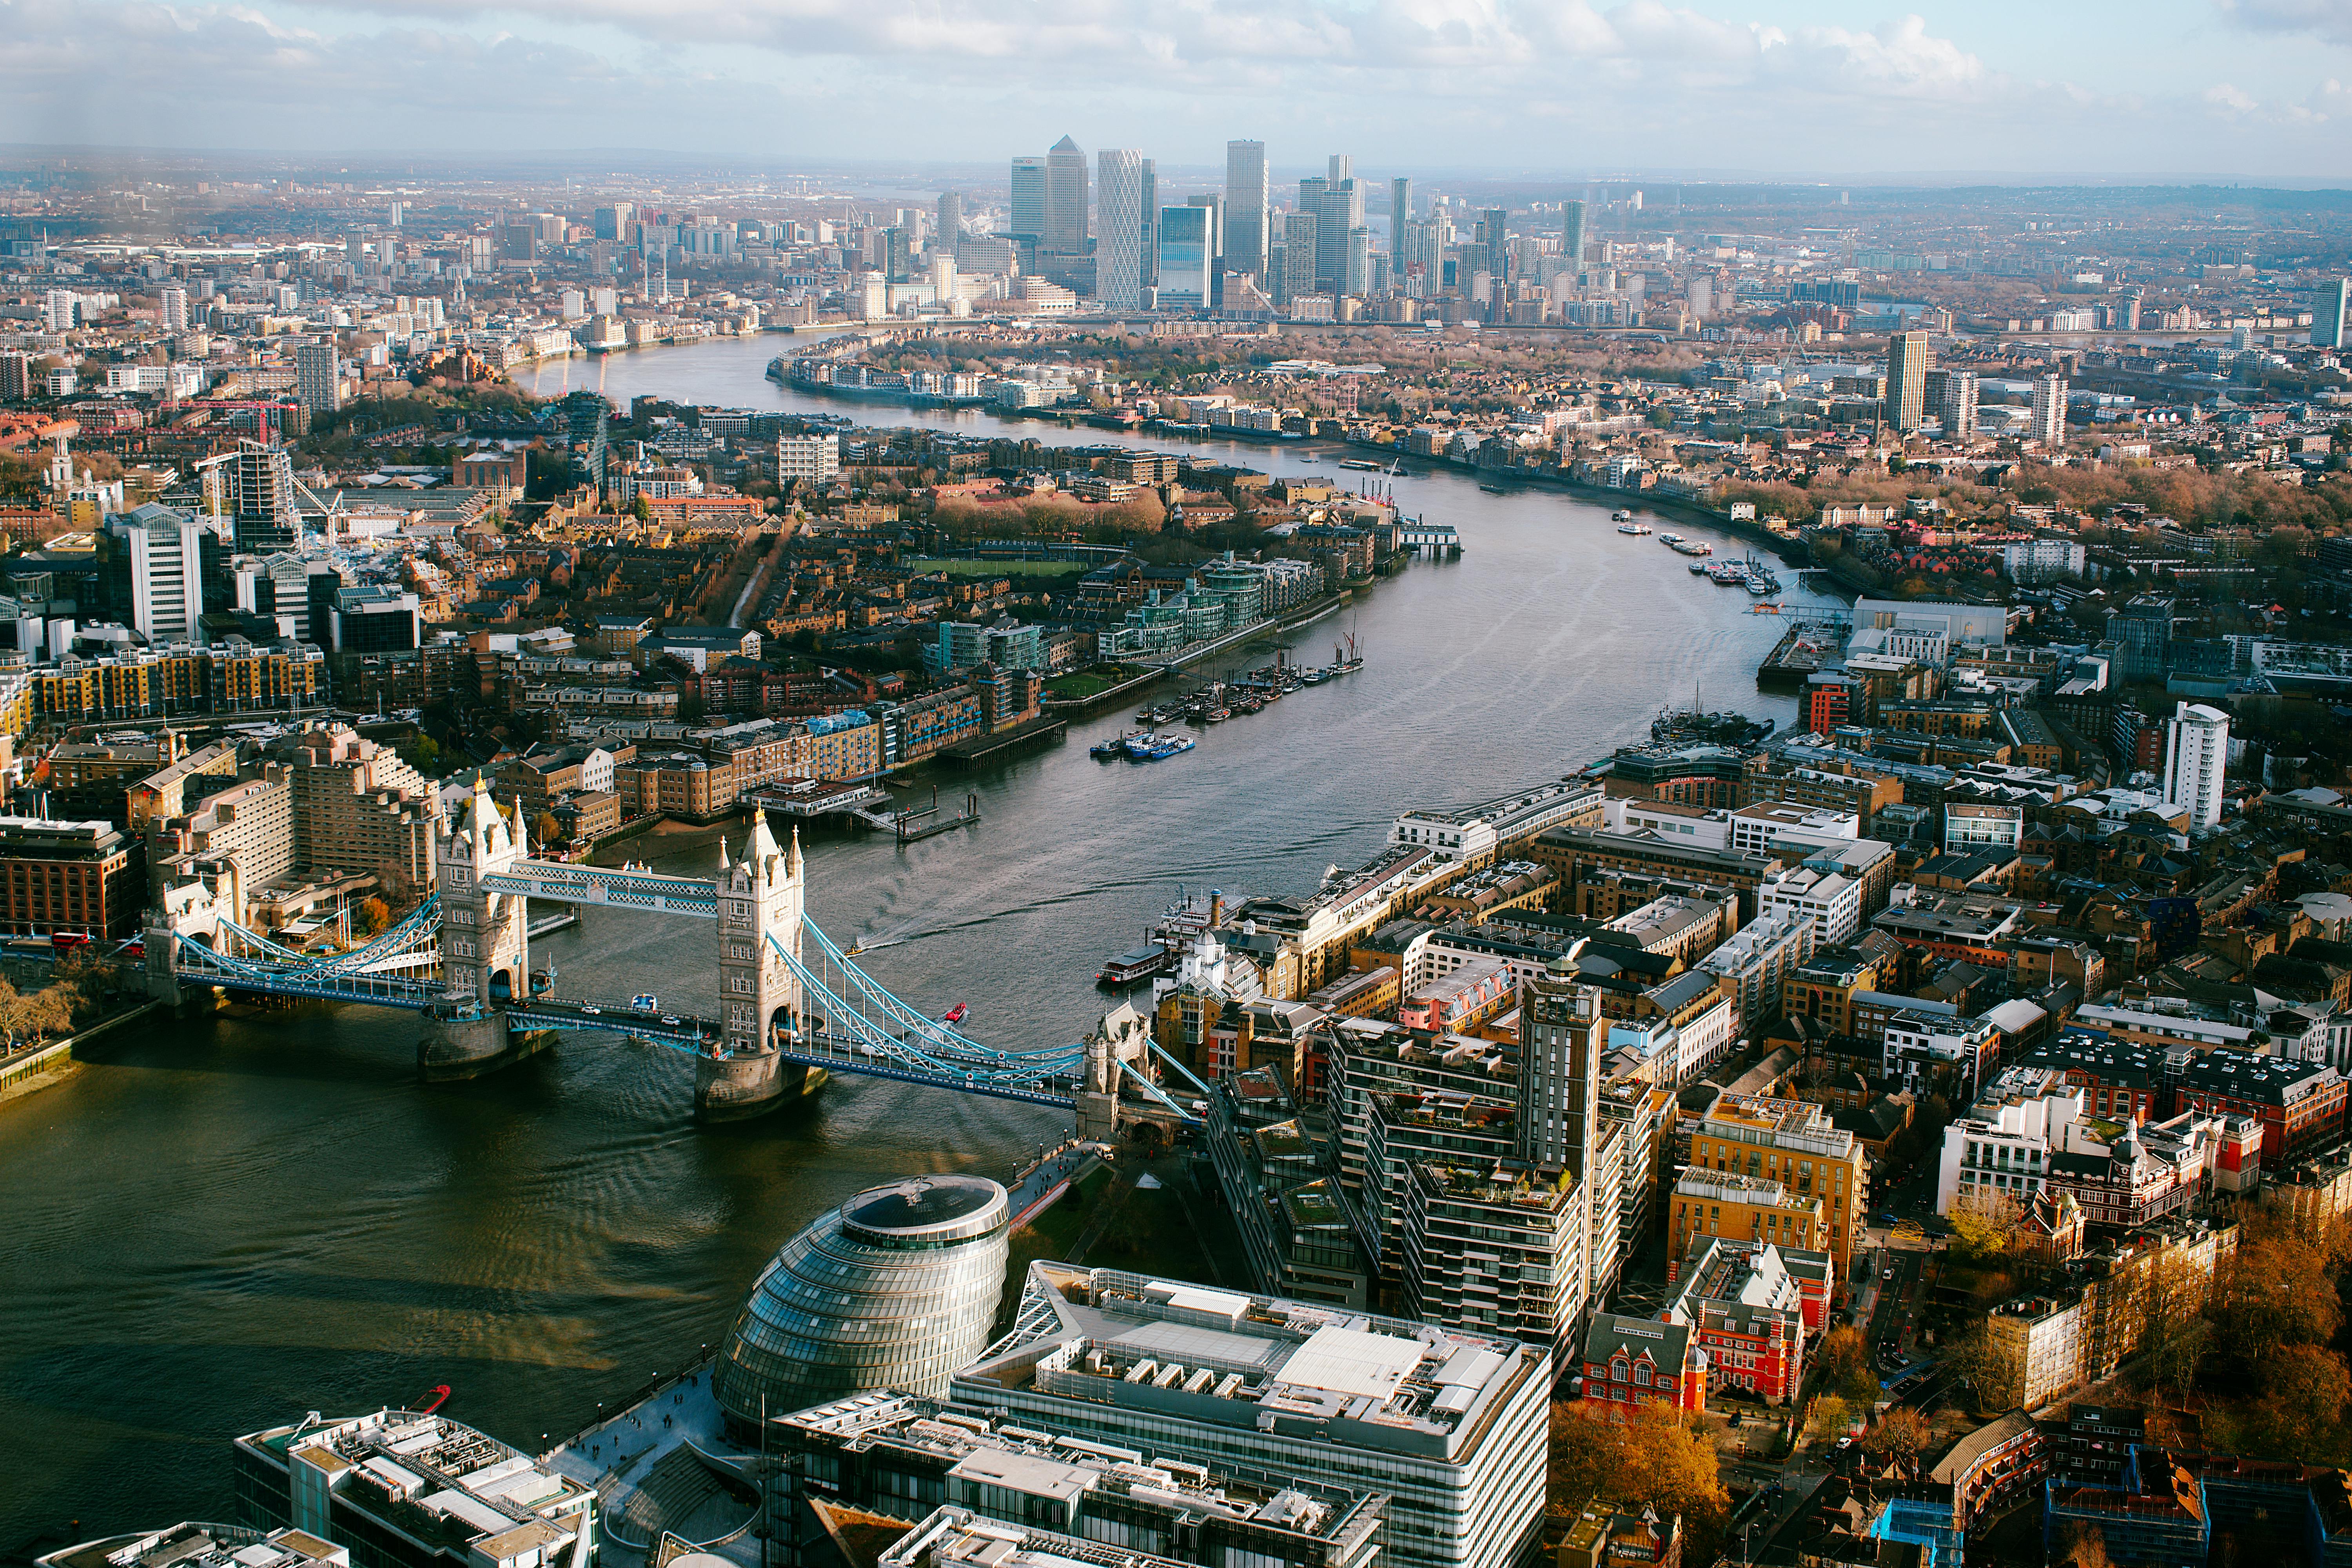 Marine Zero co-developing ambitious electricity project to accelerate decarbonisation of the River Thames